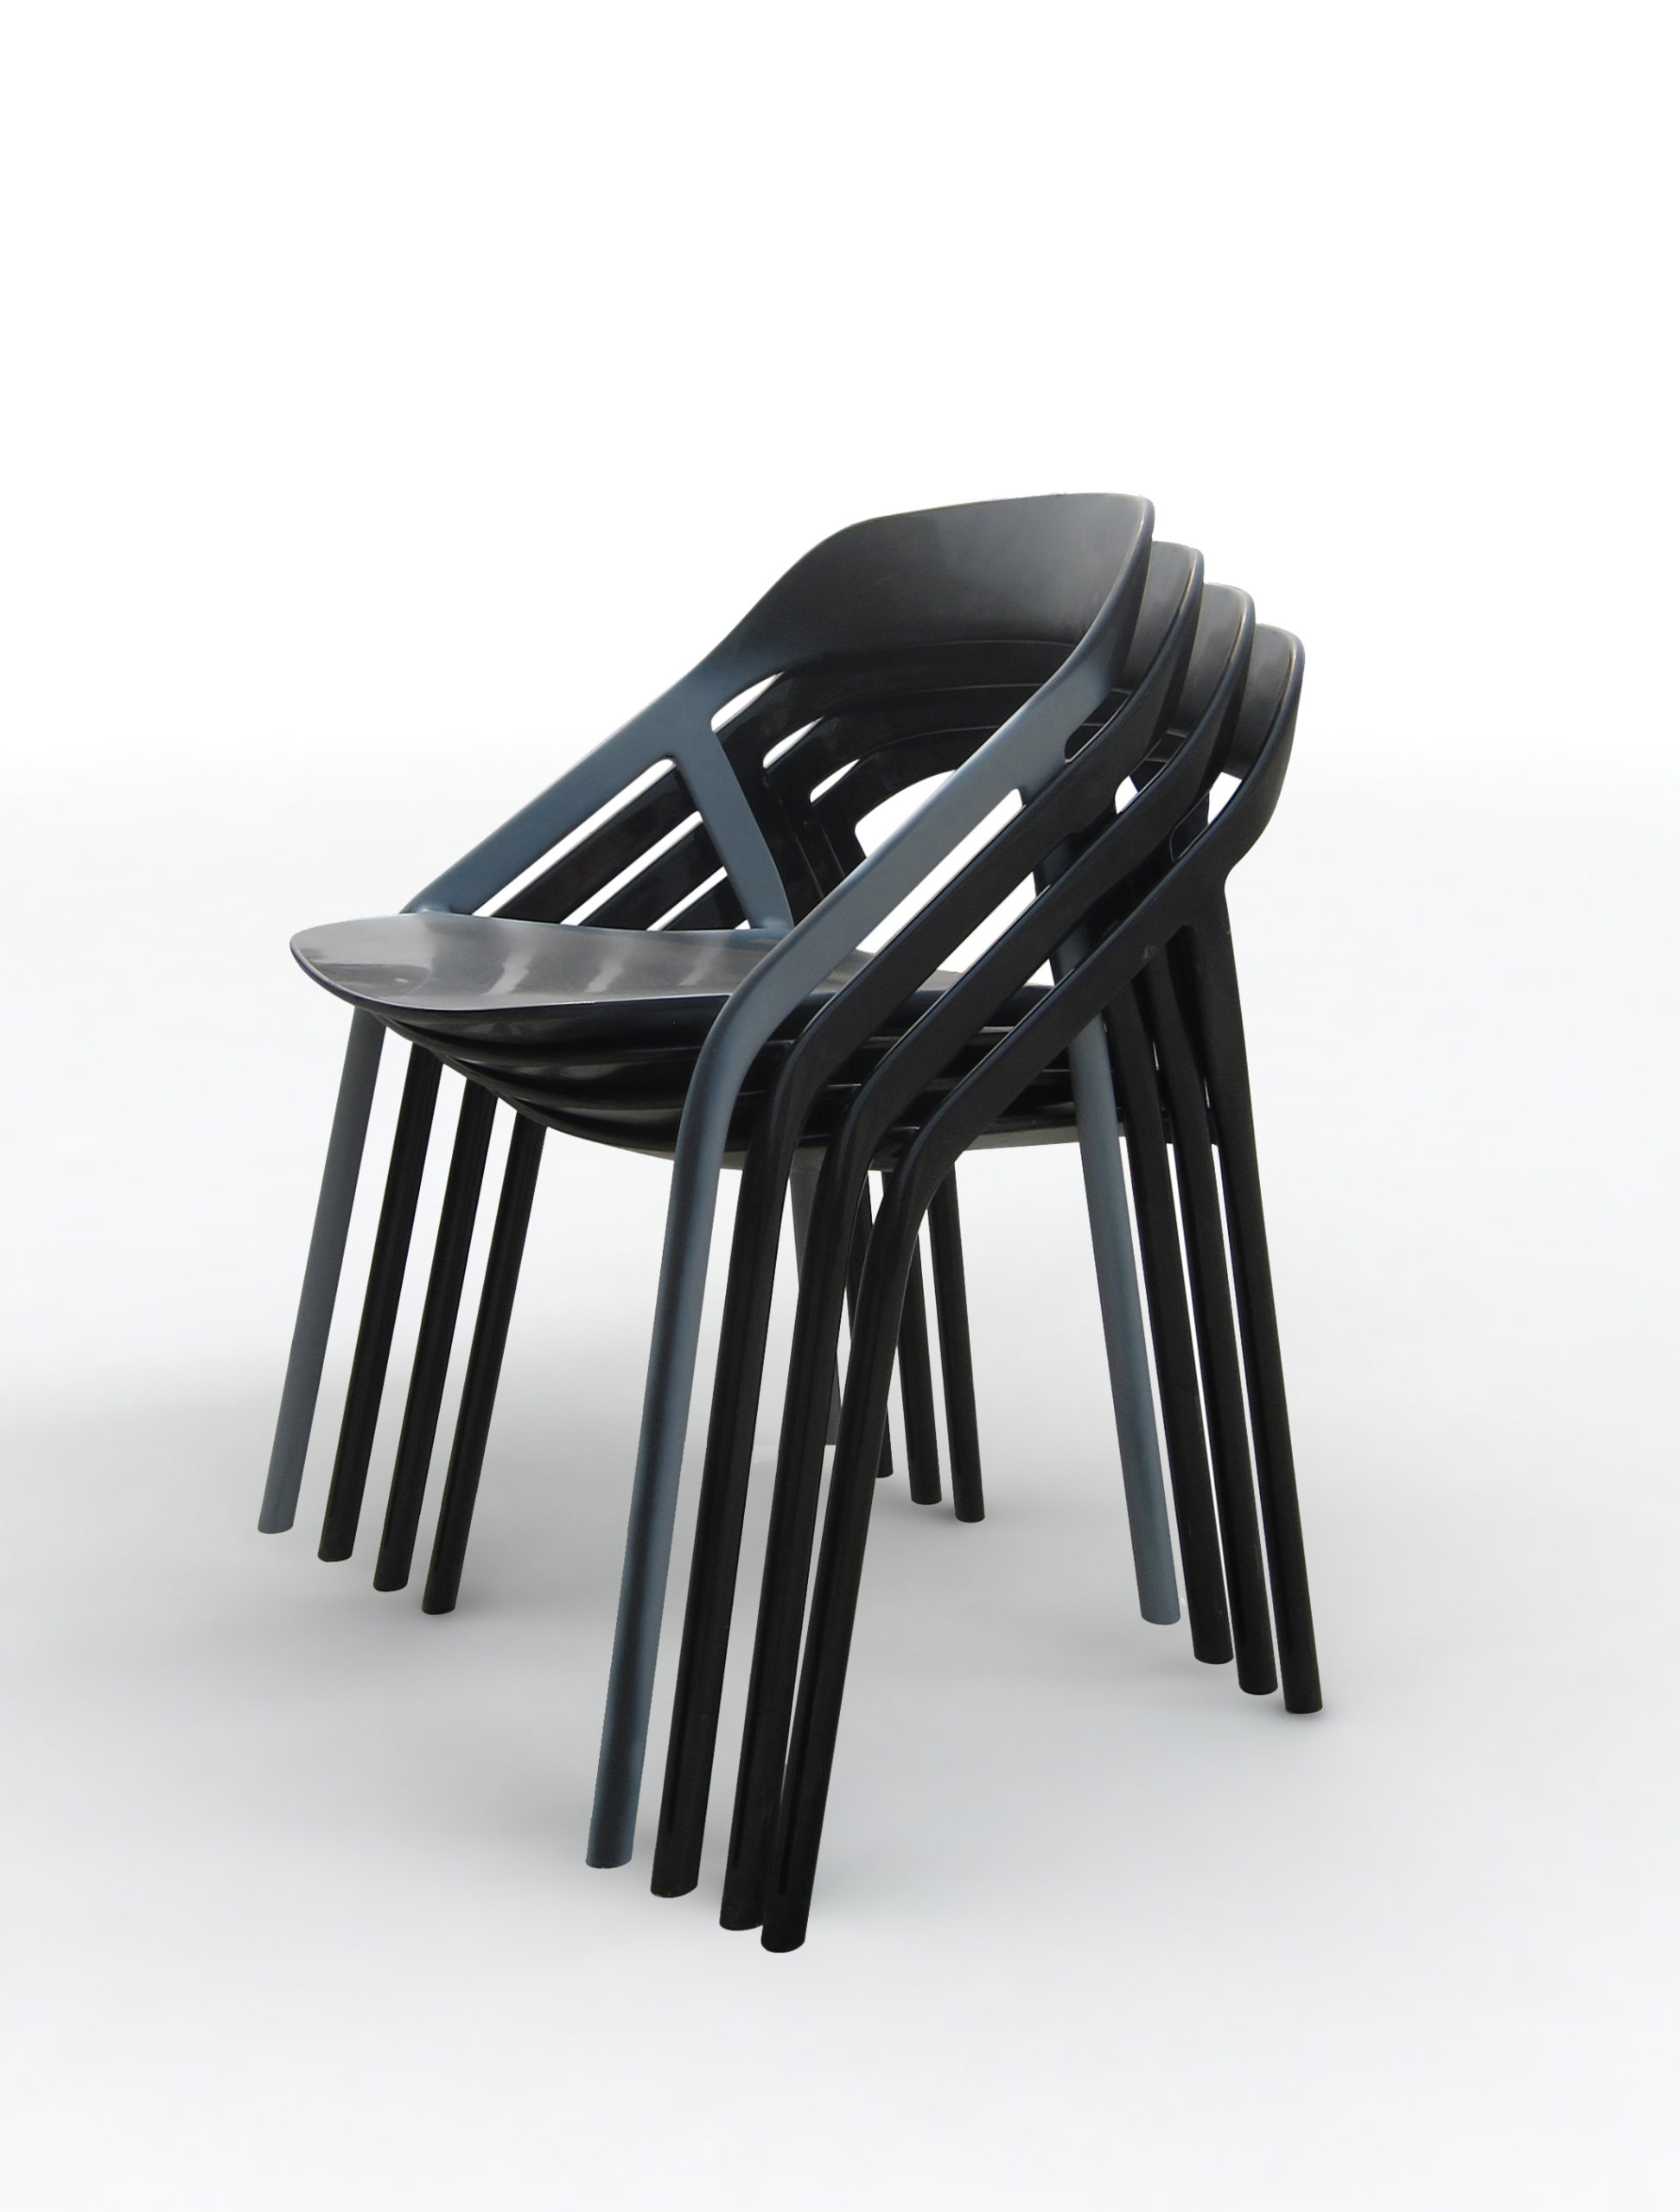 This Carbon Fibre Chair Is Lighter Than A Two-Litre Bottle Of Soft Drink